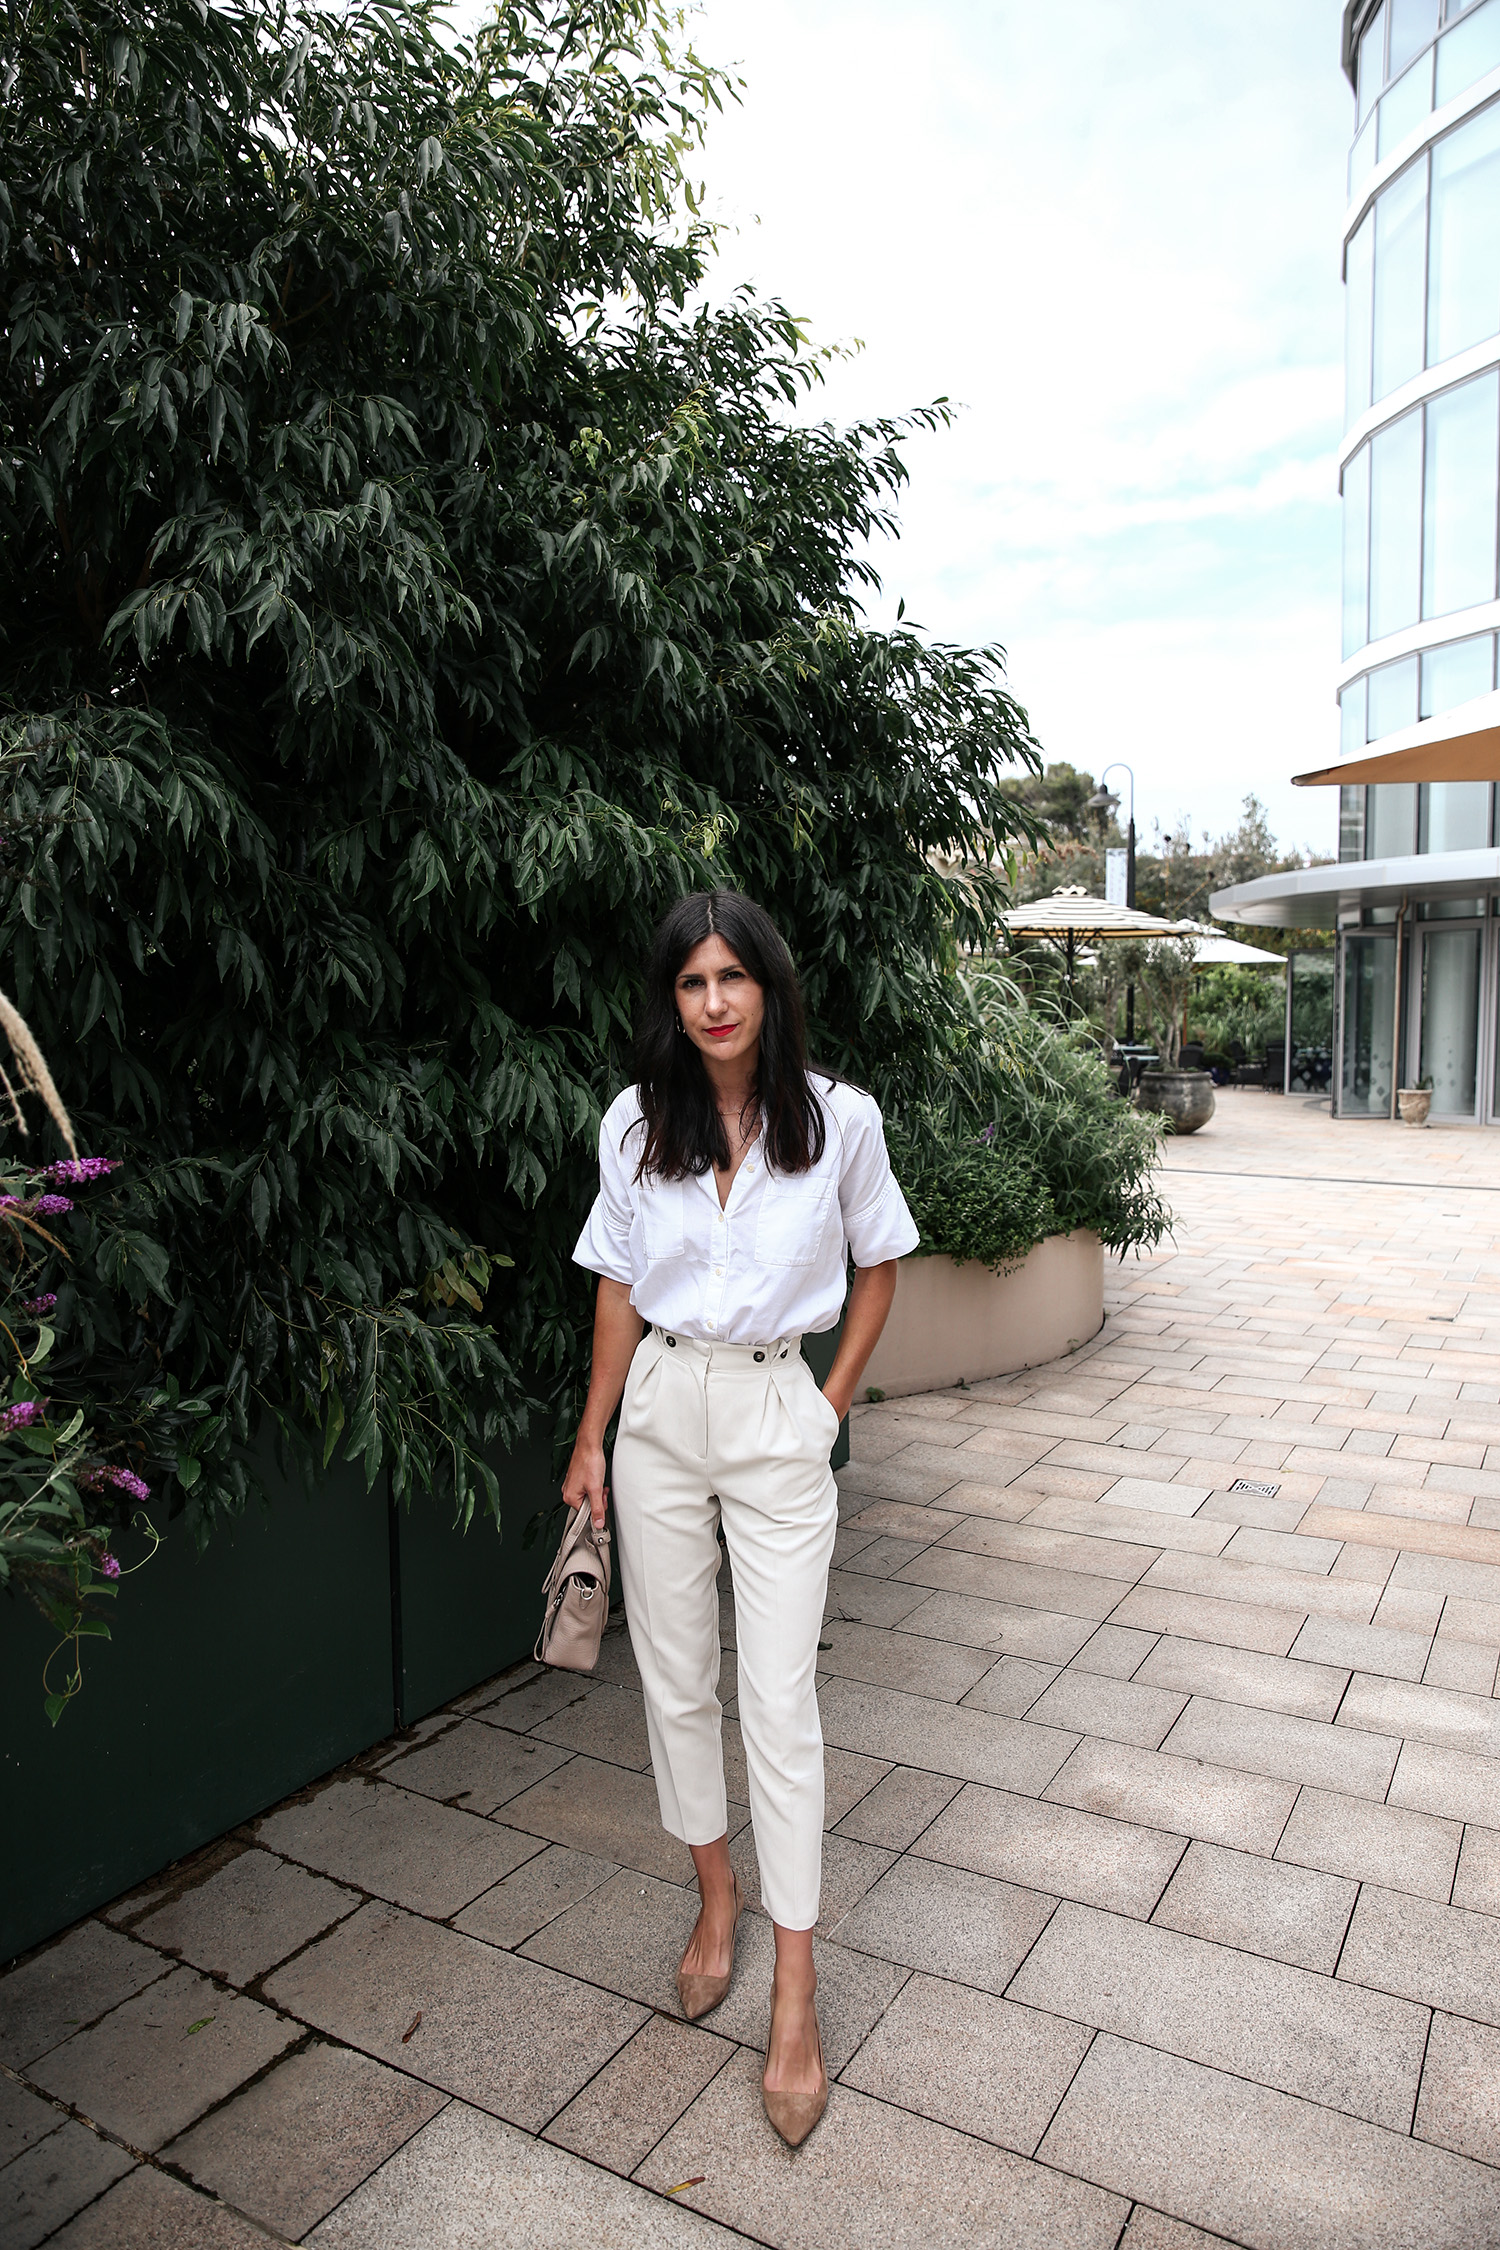 Wearing a neutral outfit with white shirt and beige trousers